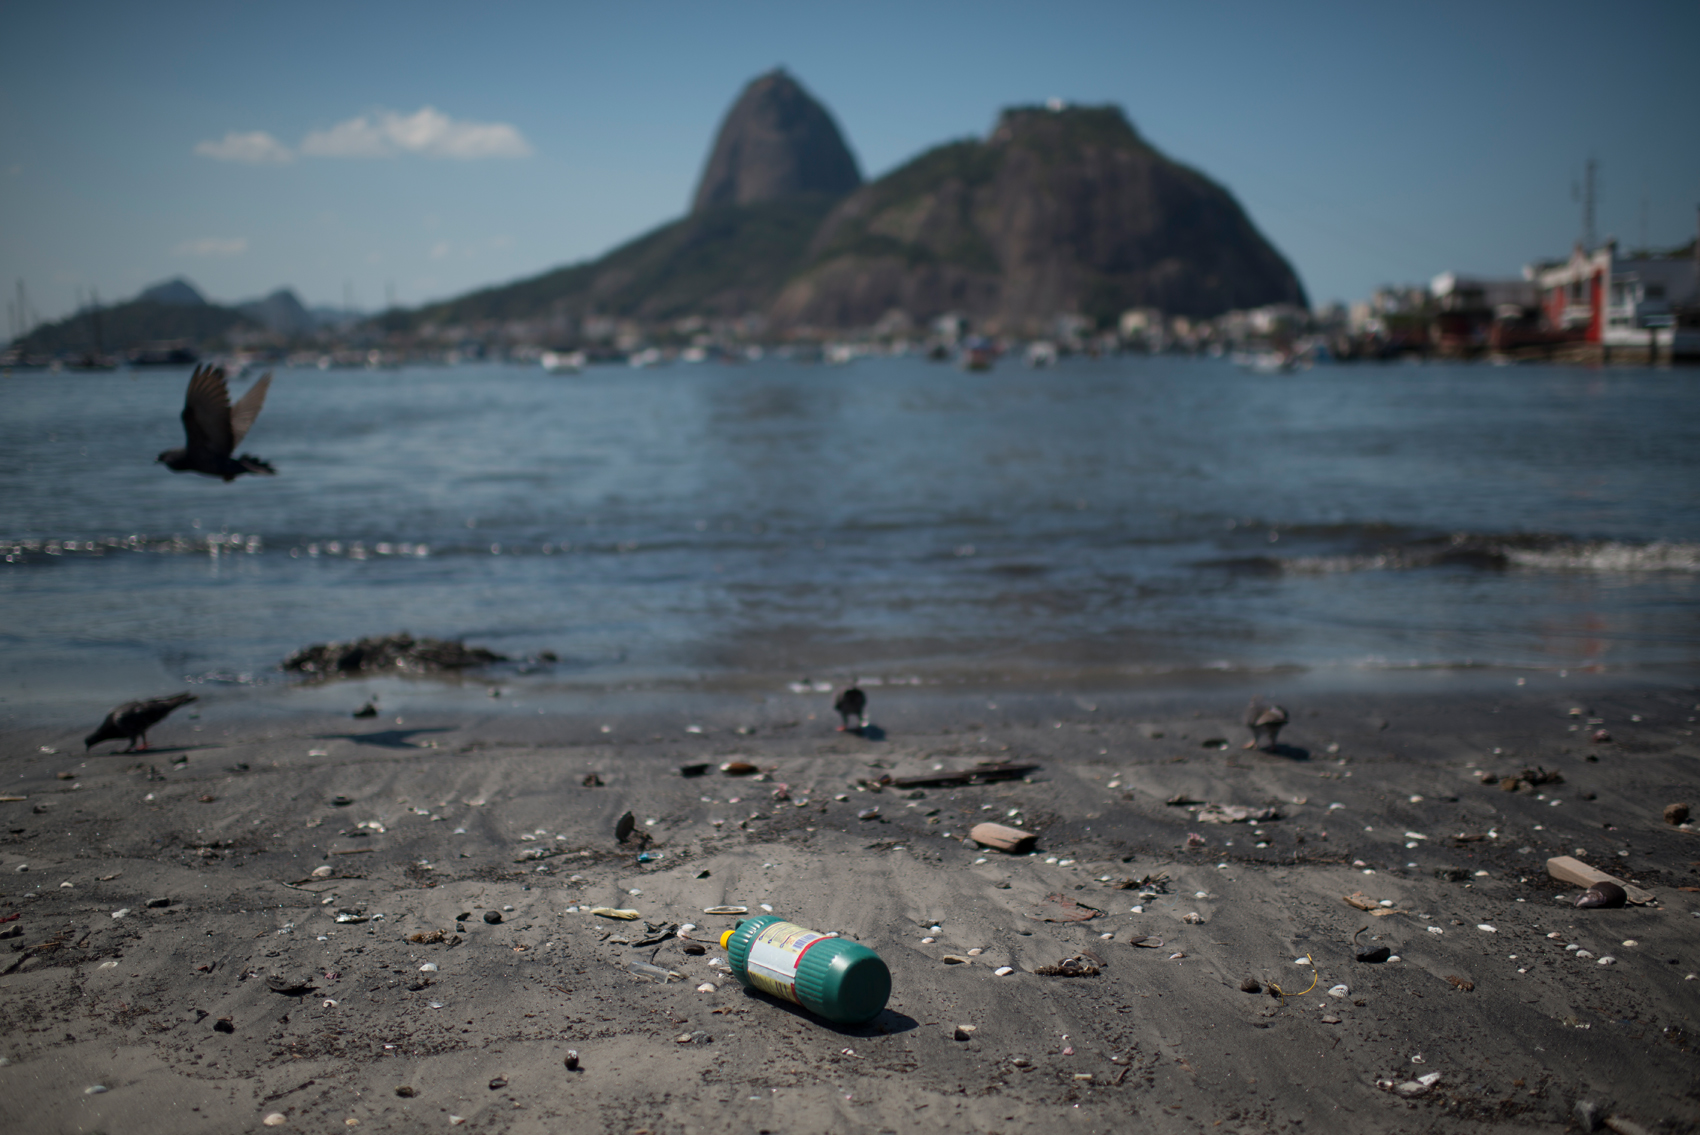  Guanabara Bay is one of the most important icons of Rio de Janeiro, Brazil. It was over these waters that European ships sailed on, some 515 years ago. The bay is home to many marine species, including the endangered Boto Cinza, but nowadays, pollut